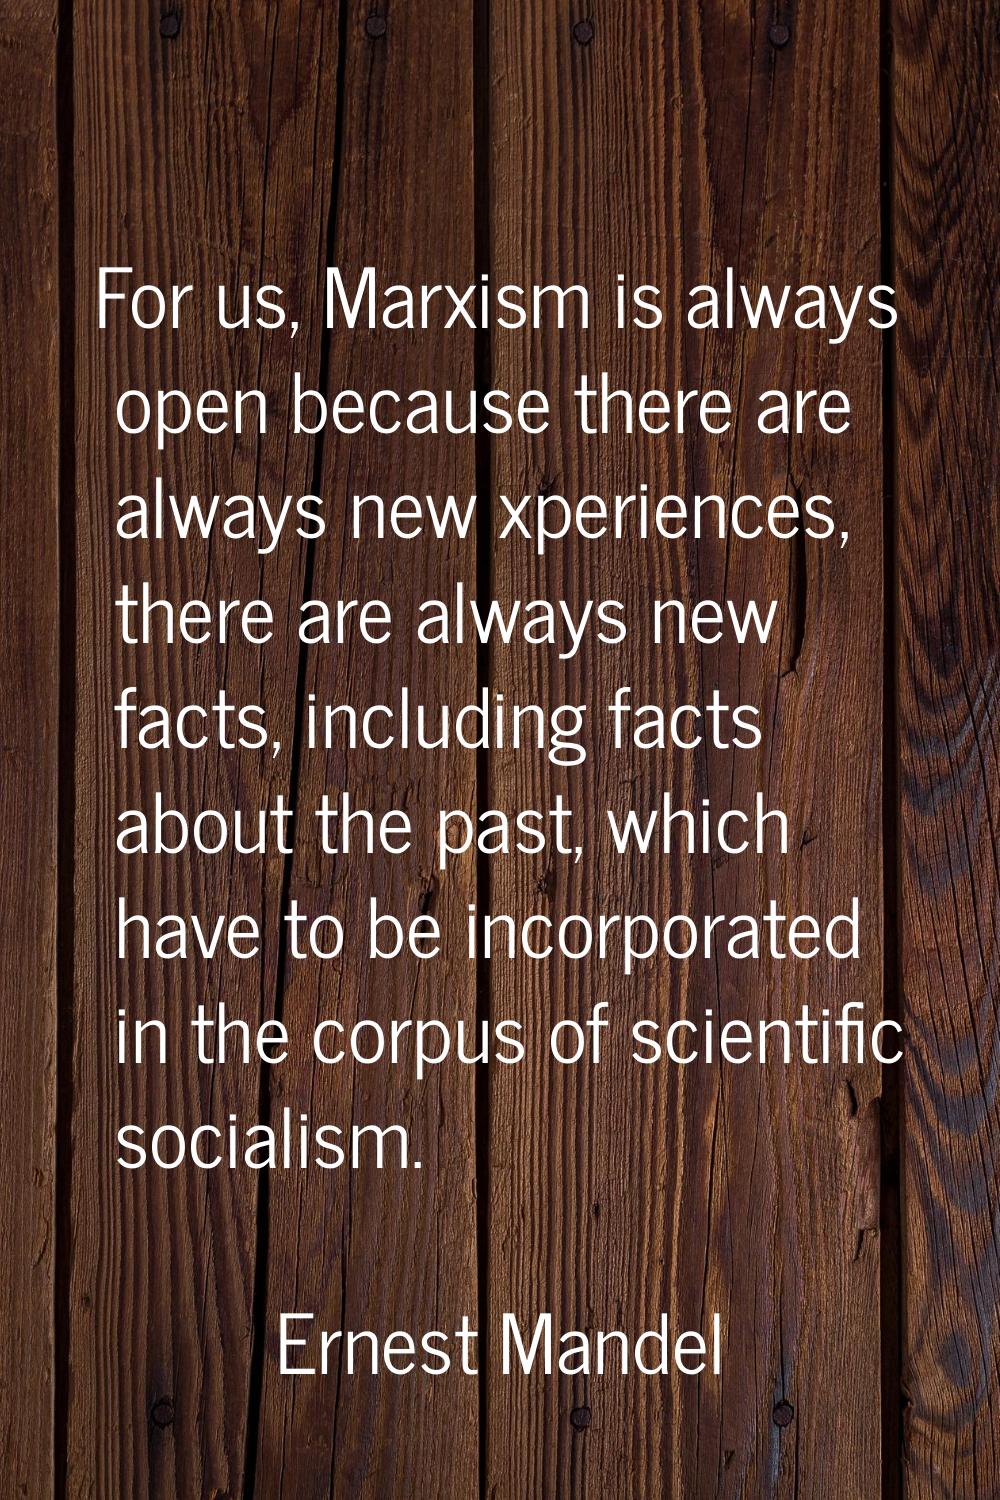 For us, Marxism is always open because there are always new xperiences, there are always new facts,